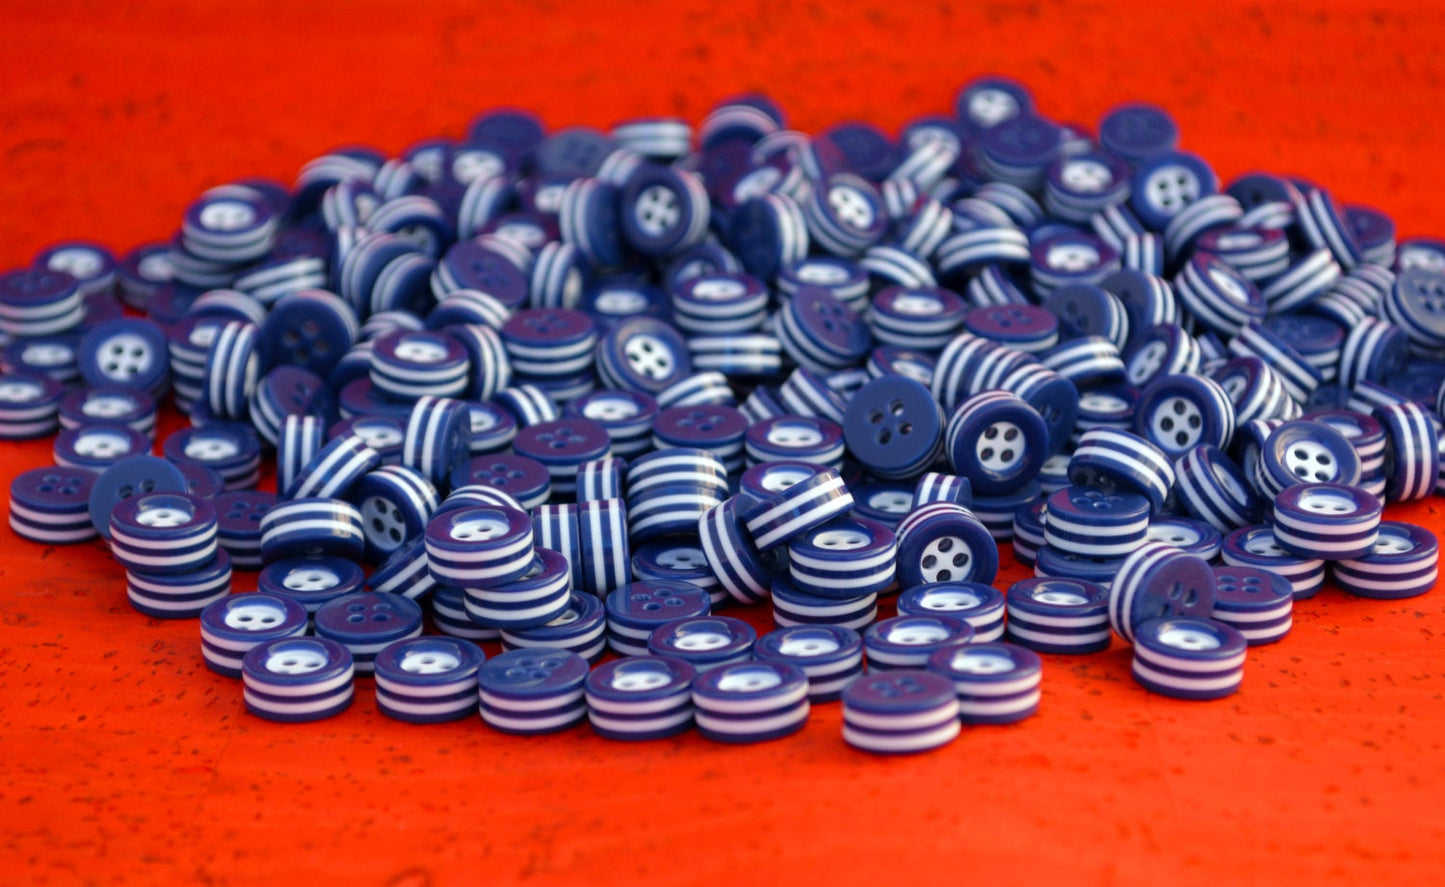 16 white and blue STRIPED BUTTONS for 1 complete button down shirt - 5mm thick! - great quality - Made in ITALY